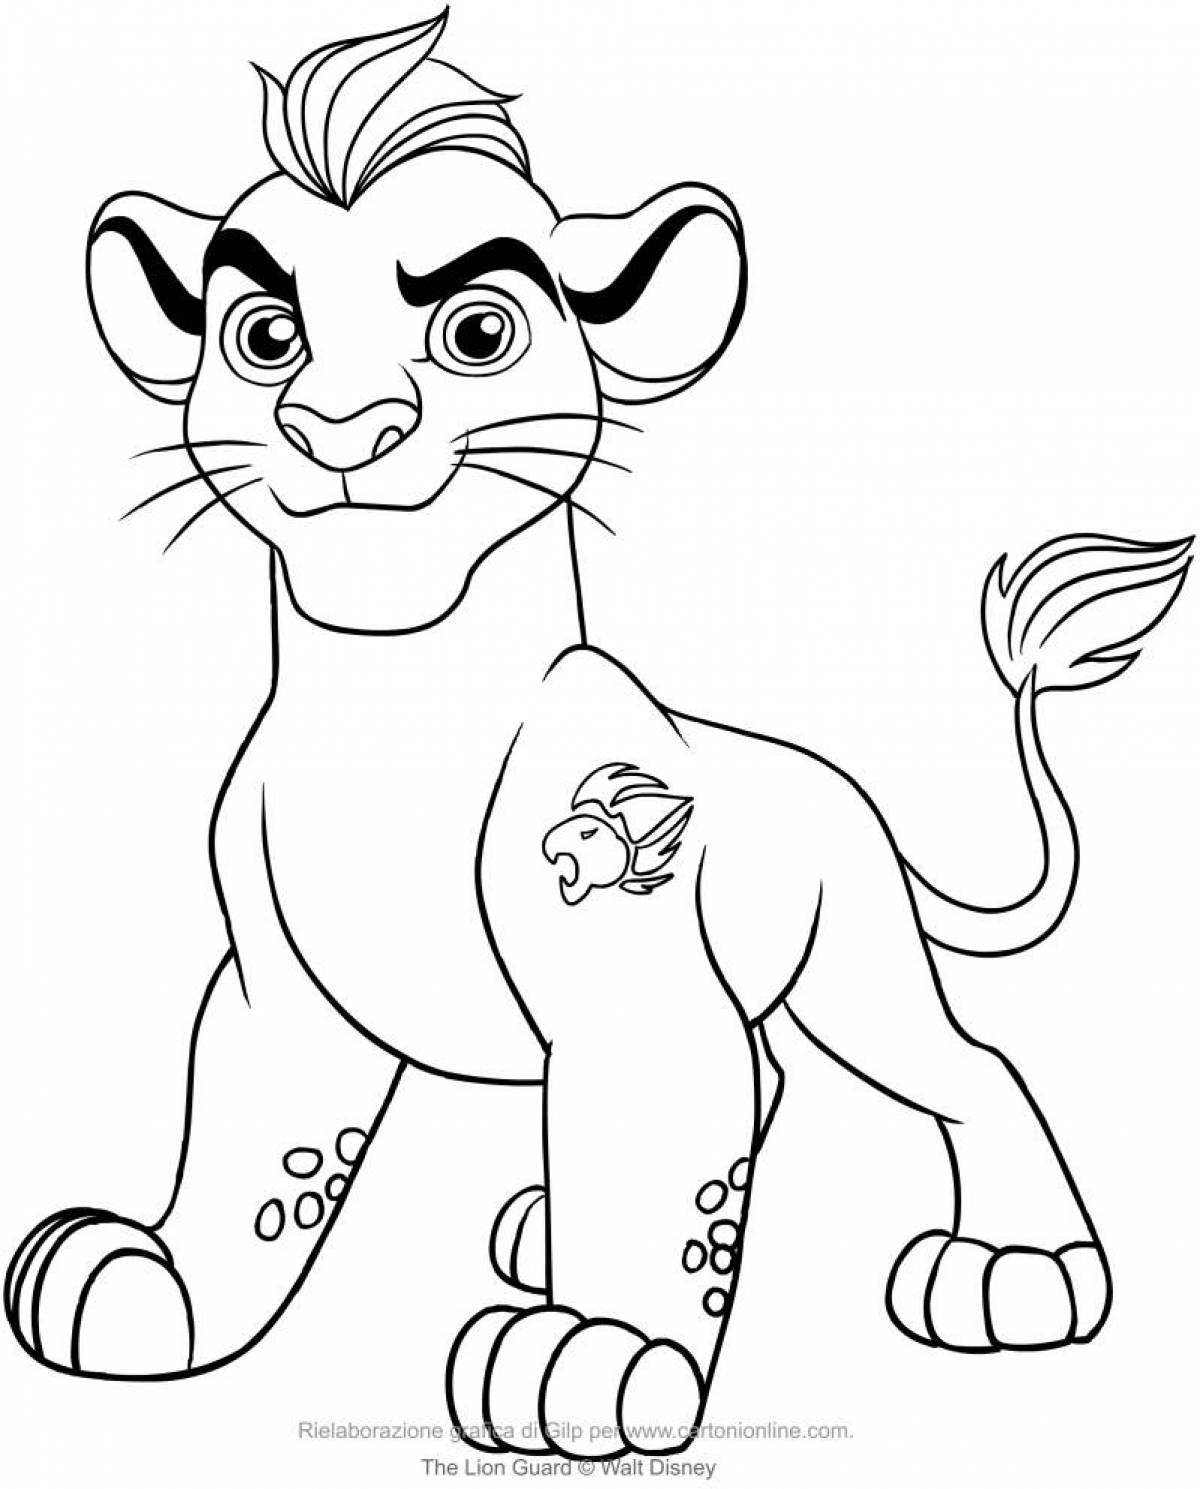 Luxury lion king coloring book